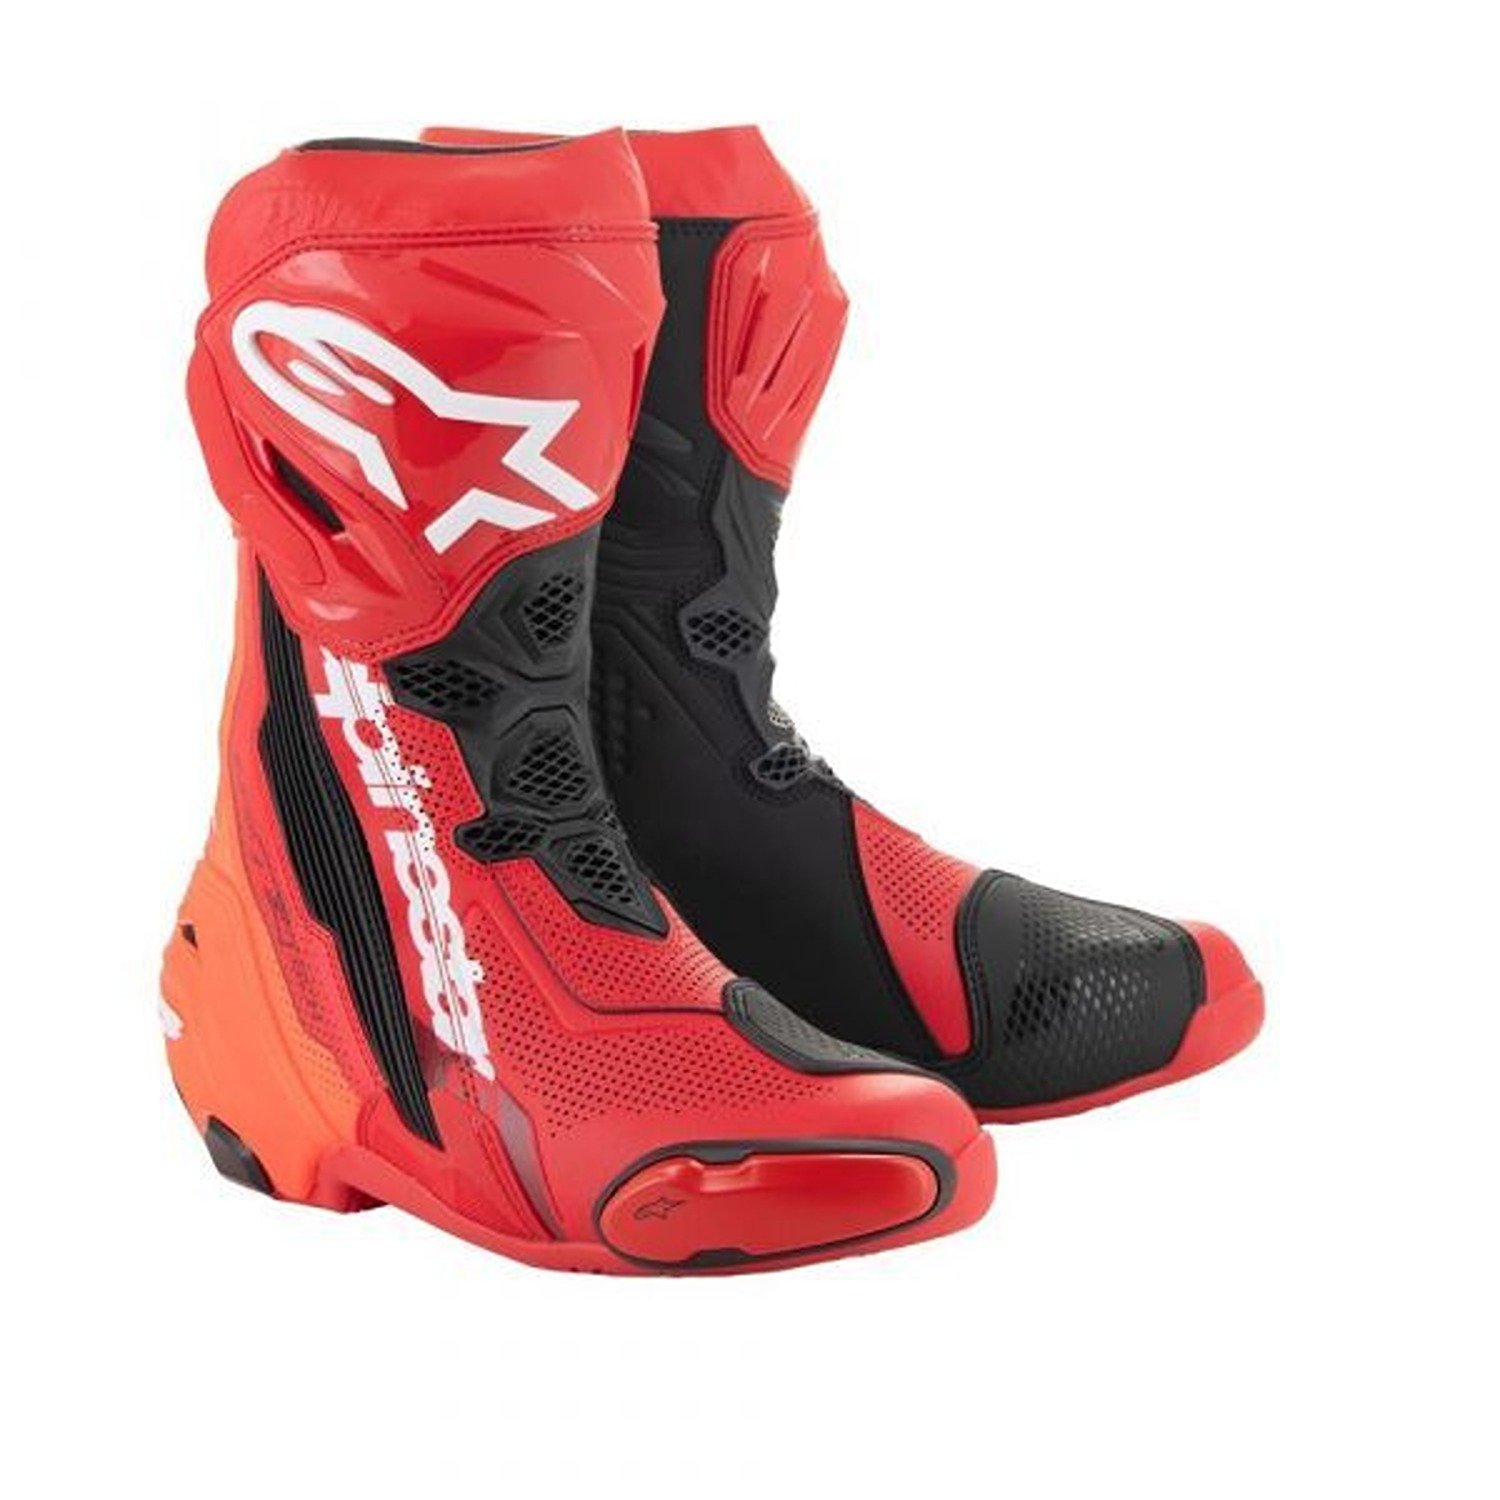 Image of Alpinestars Supertech R Vented Boots Bright Red Fluo Size 46 ID 8059347377964